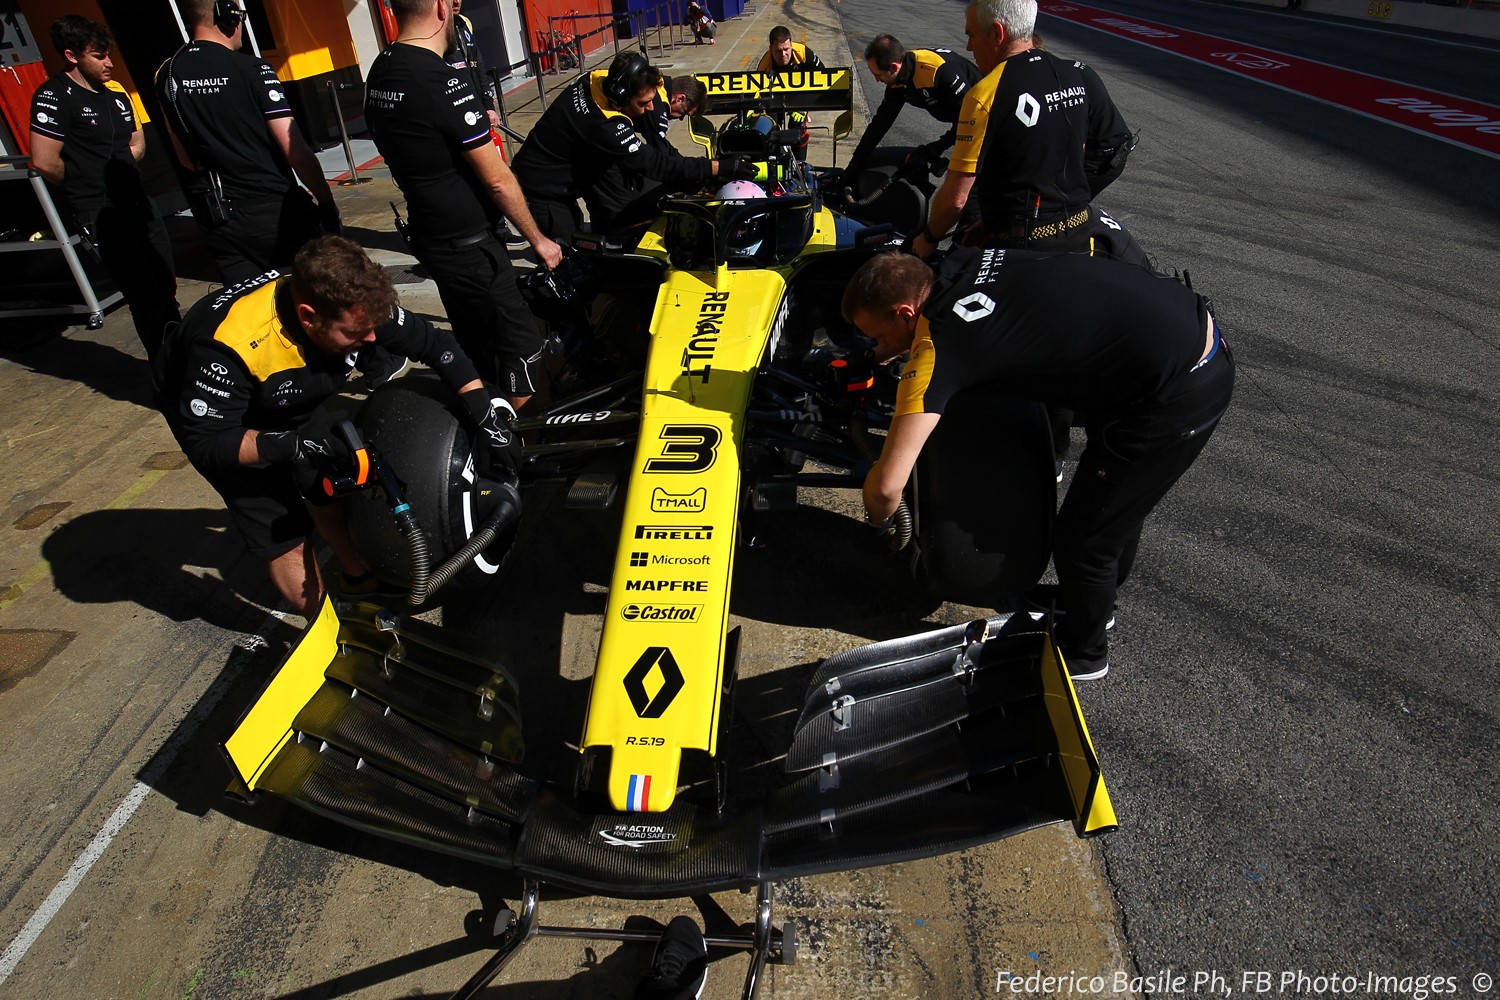 Renault in fight to be 3rd or 4th loser